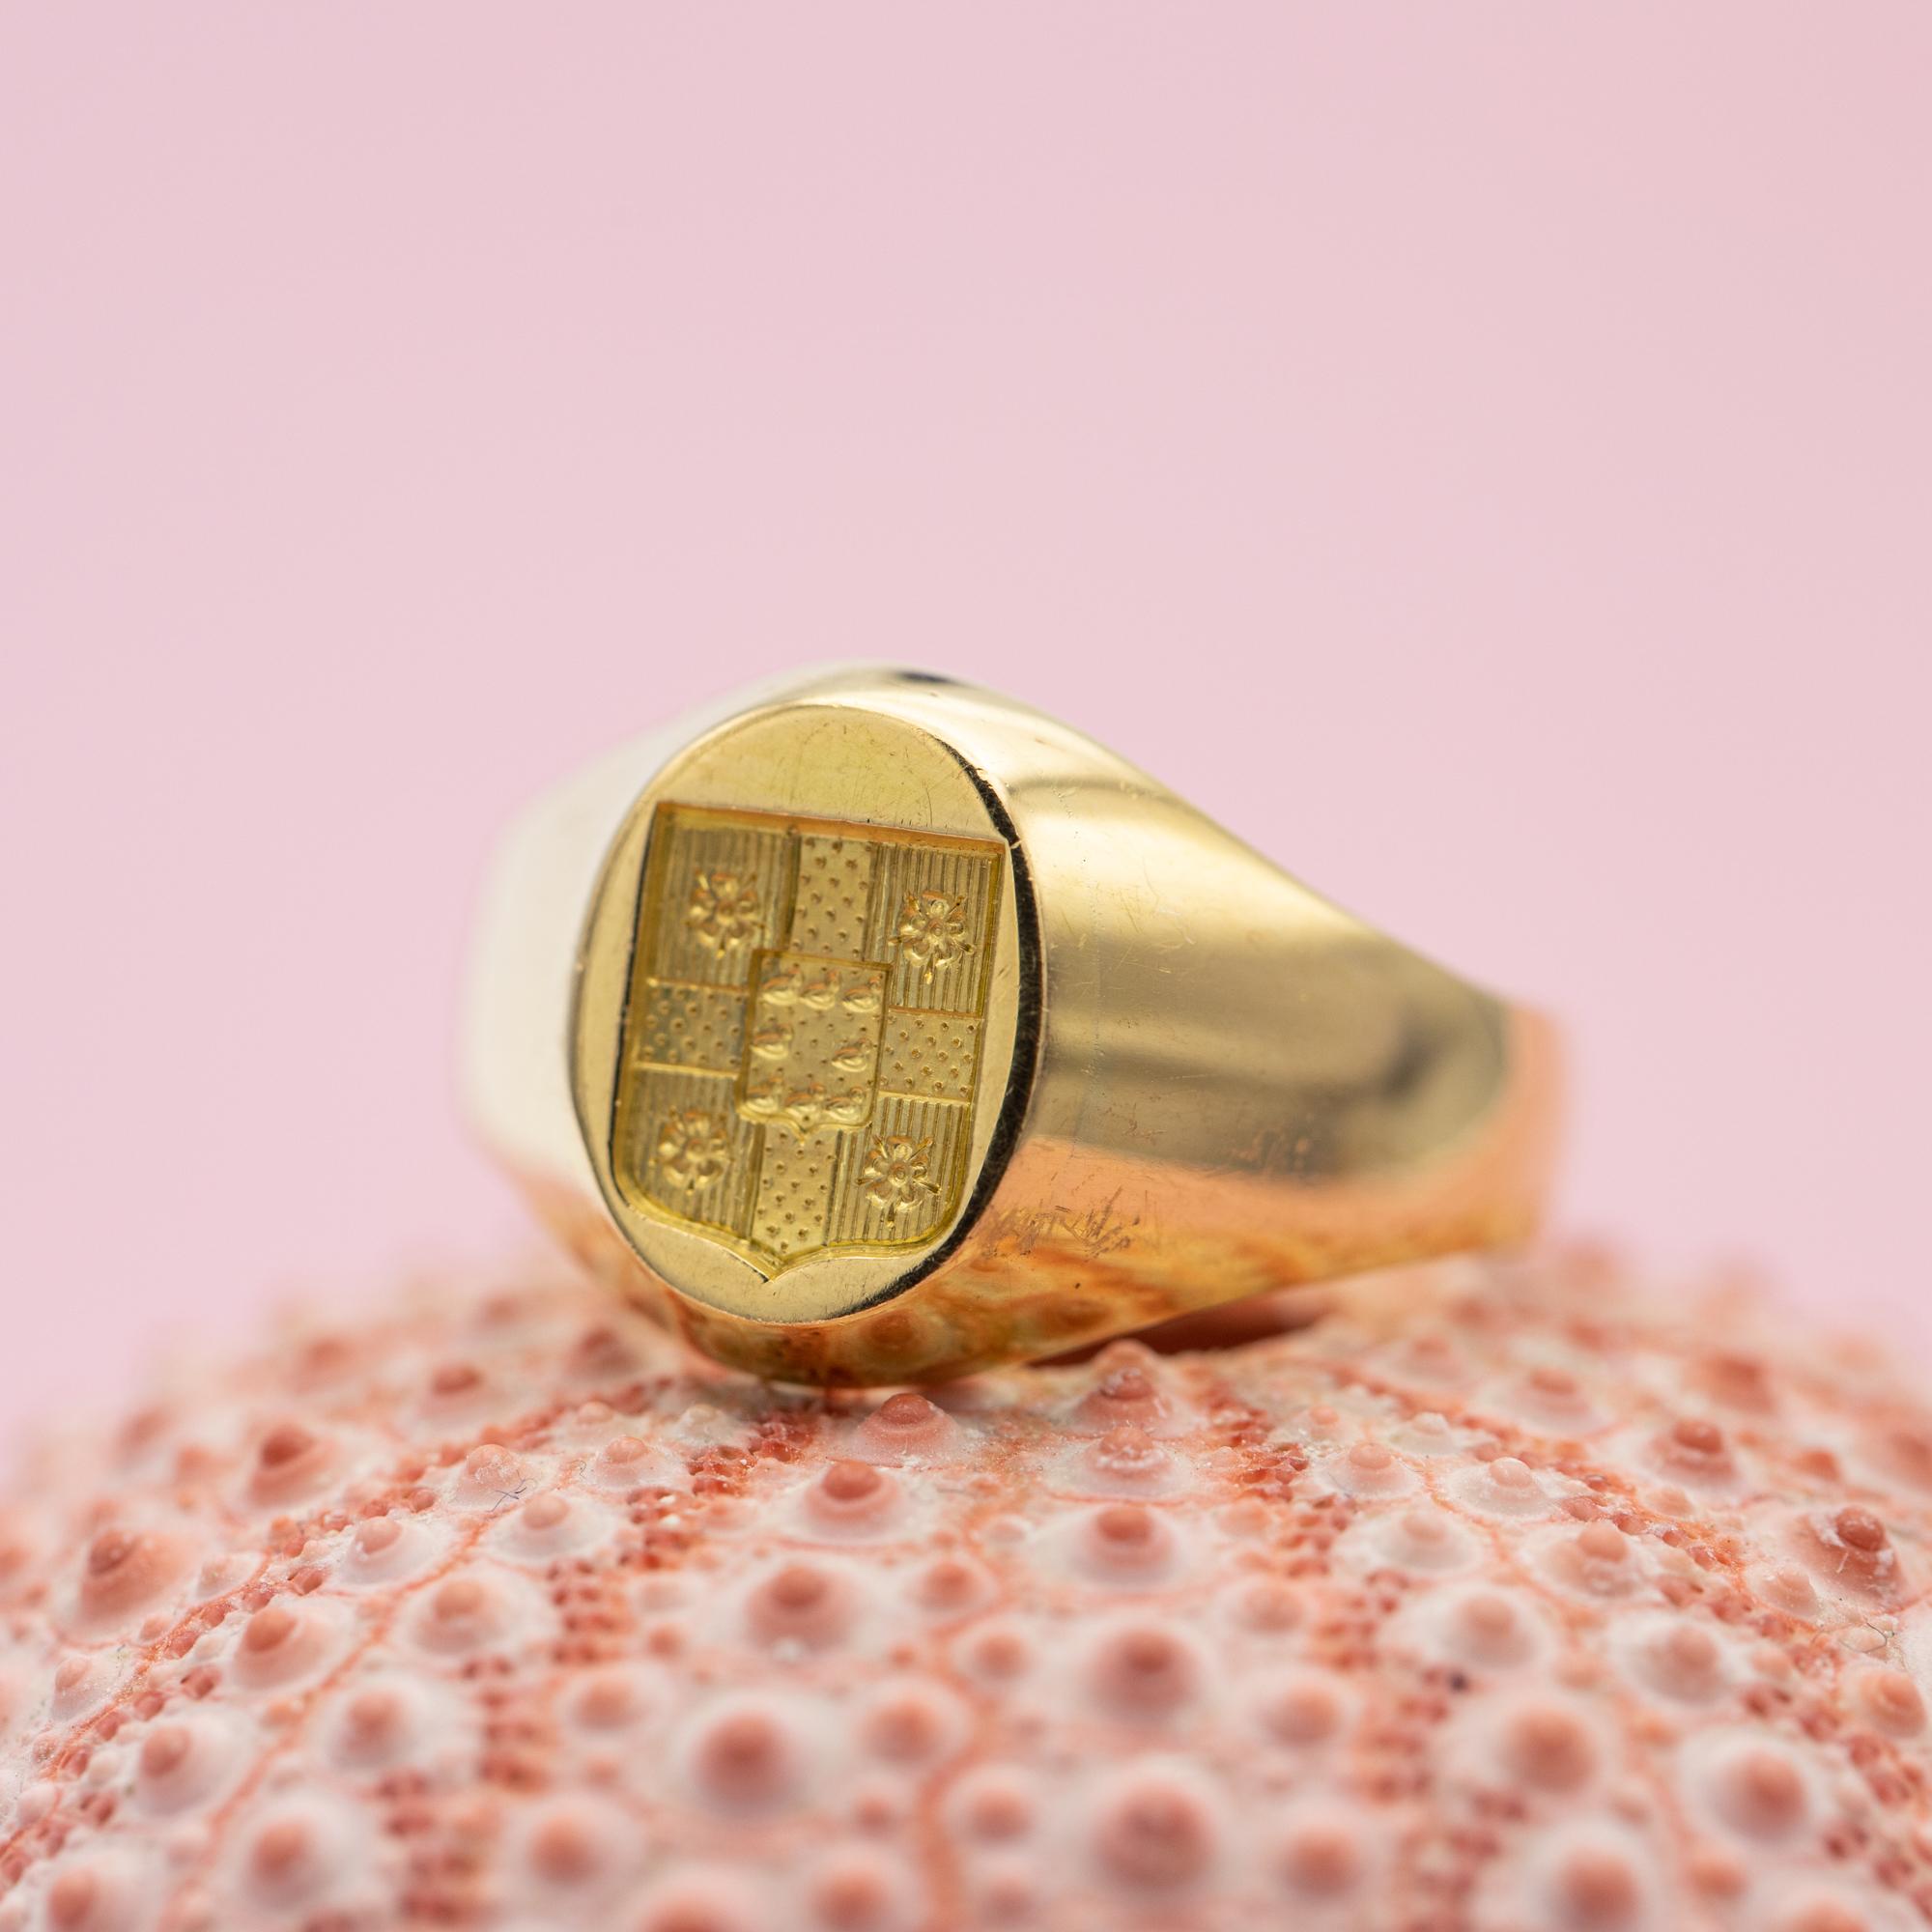 For sale is this wonderful large sized signet ring. This 18 K handmade oval stunner is a real sign of nobility and status which is perfect to wear with your favorite statement outfit. Signet rings were first worn in the ancient times to seal a